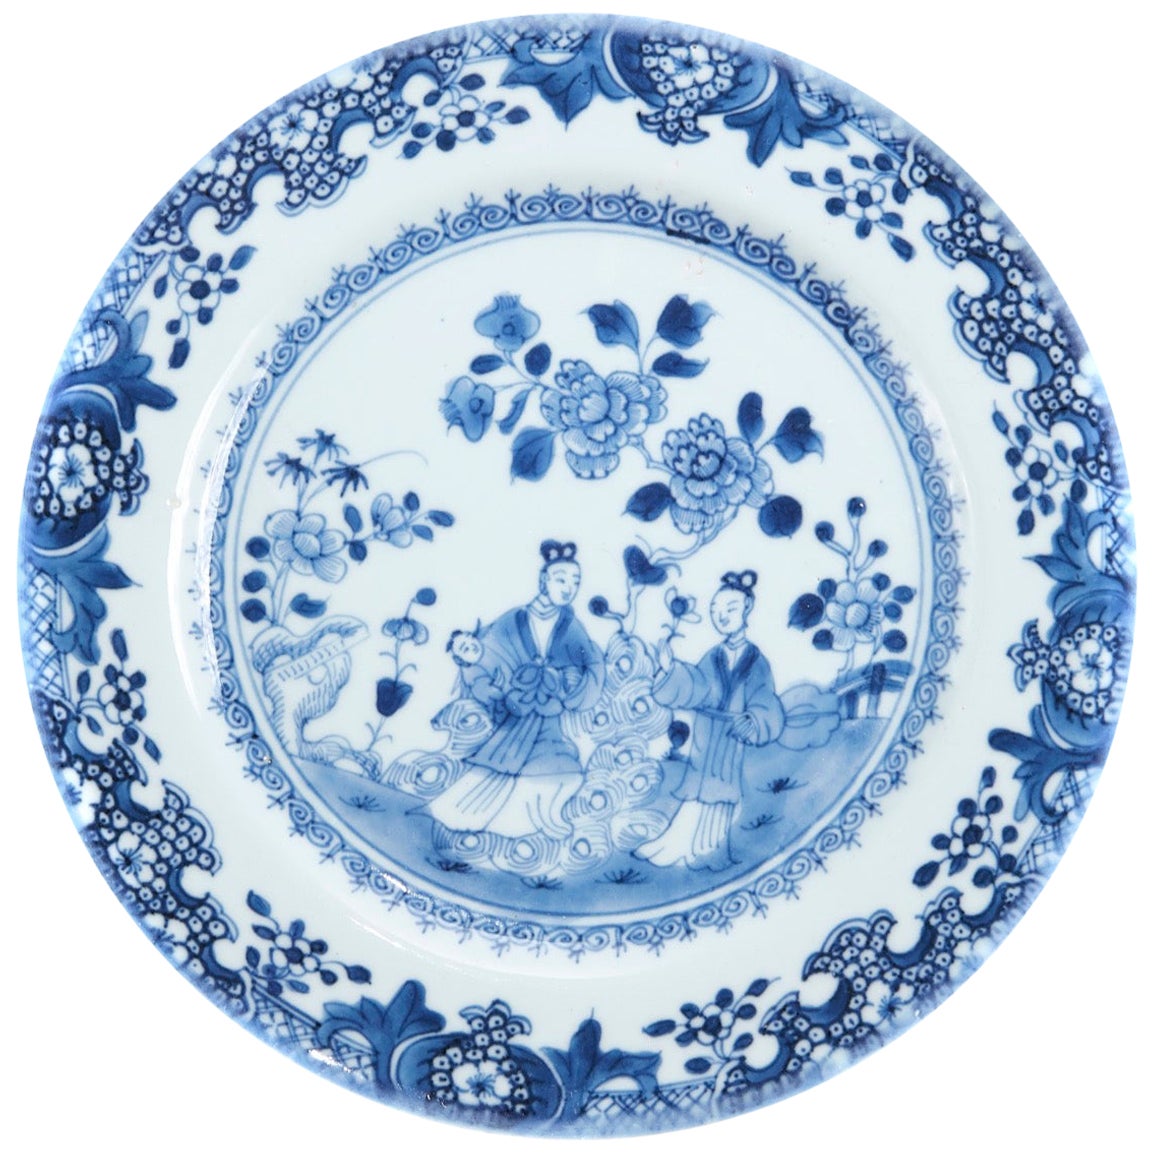 18th Century Qing Chinese Porcelain Plate Blue and White Octagonal ...
